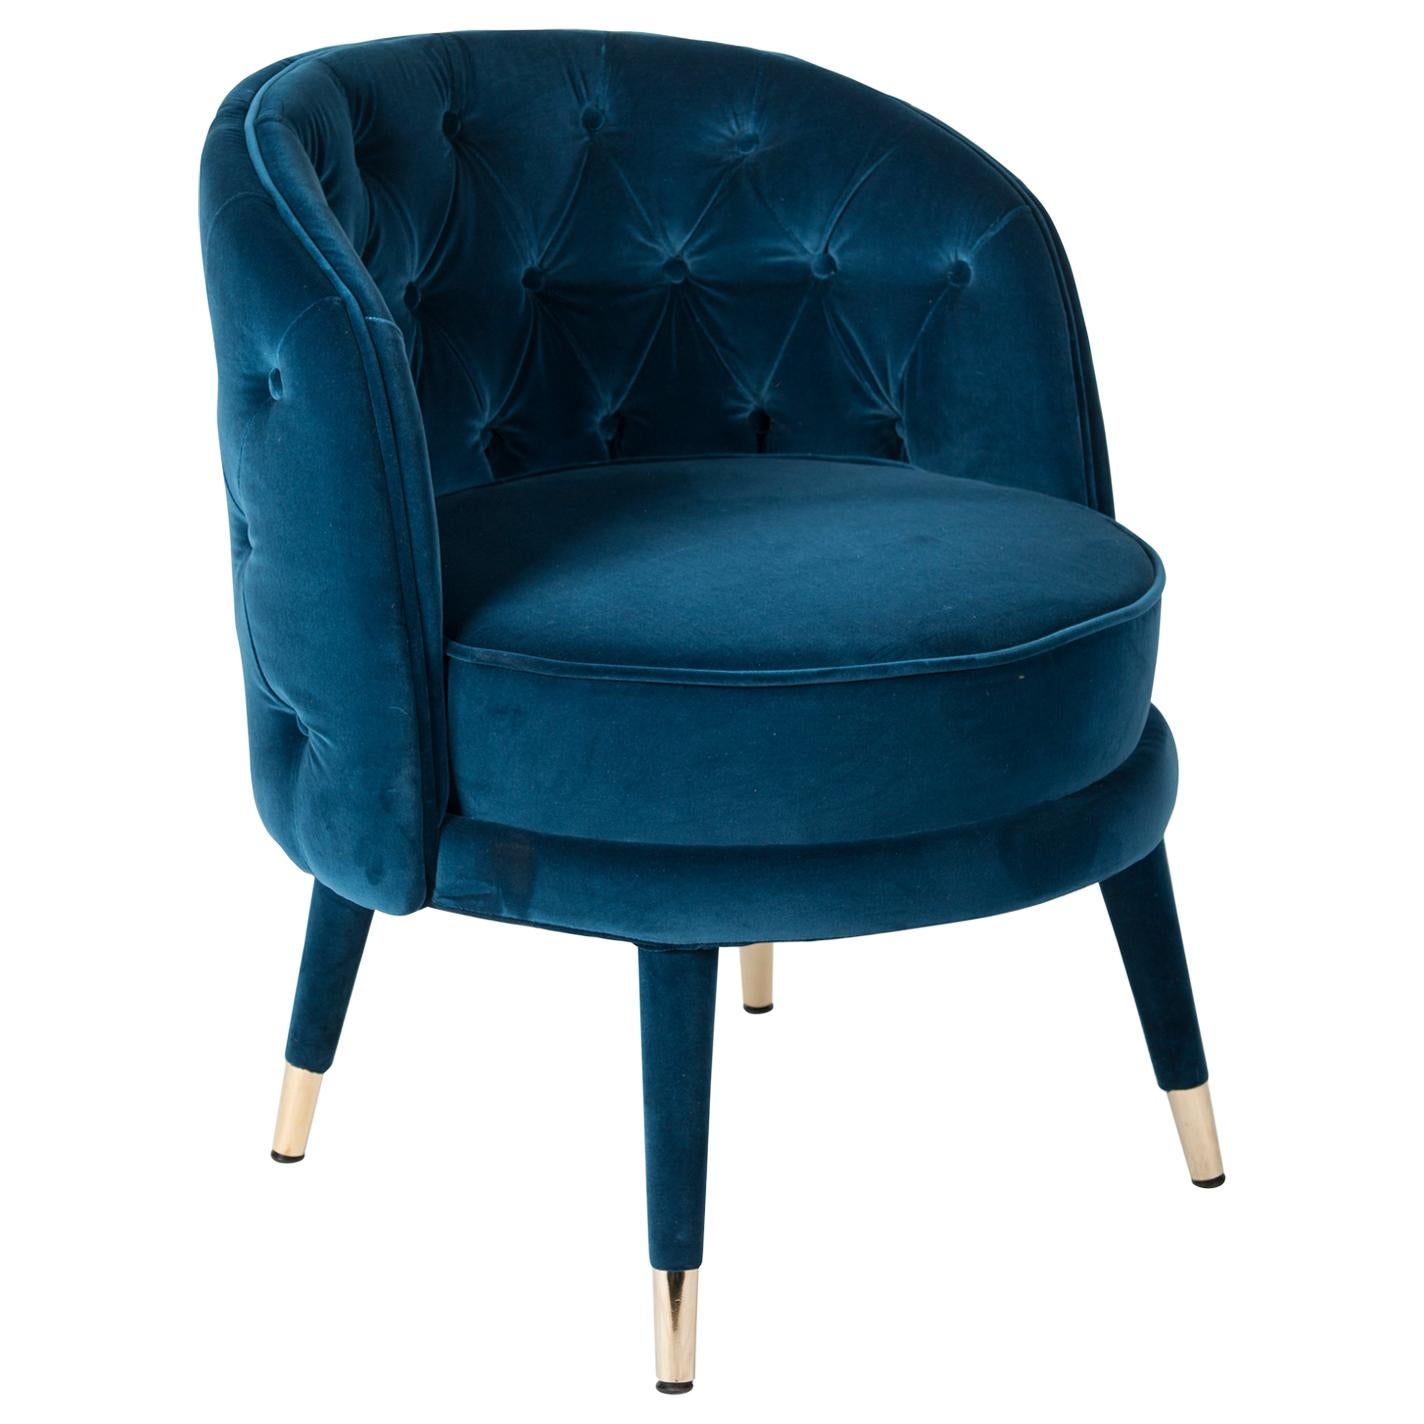 Armchair Round Capitonné, Blue Velvet Fabric, Made in Italy For Sale